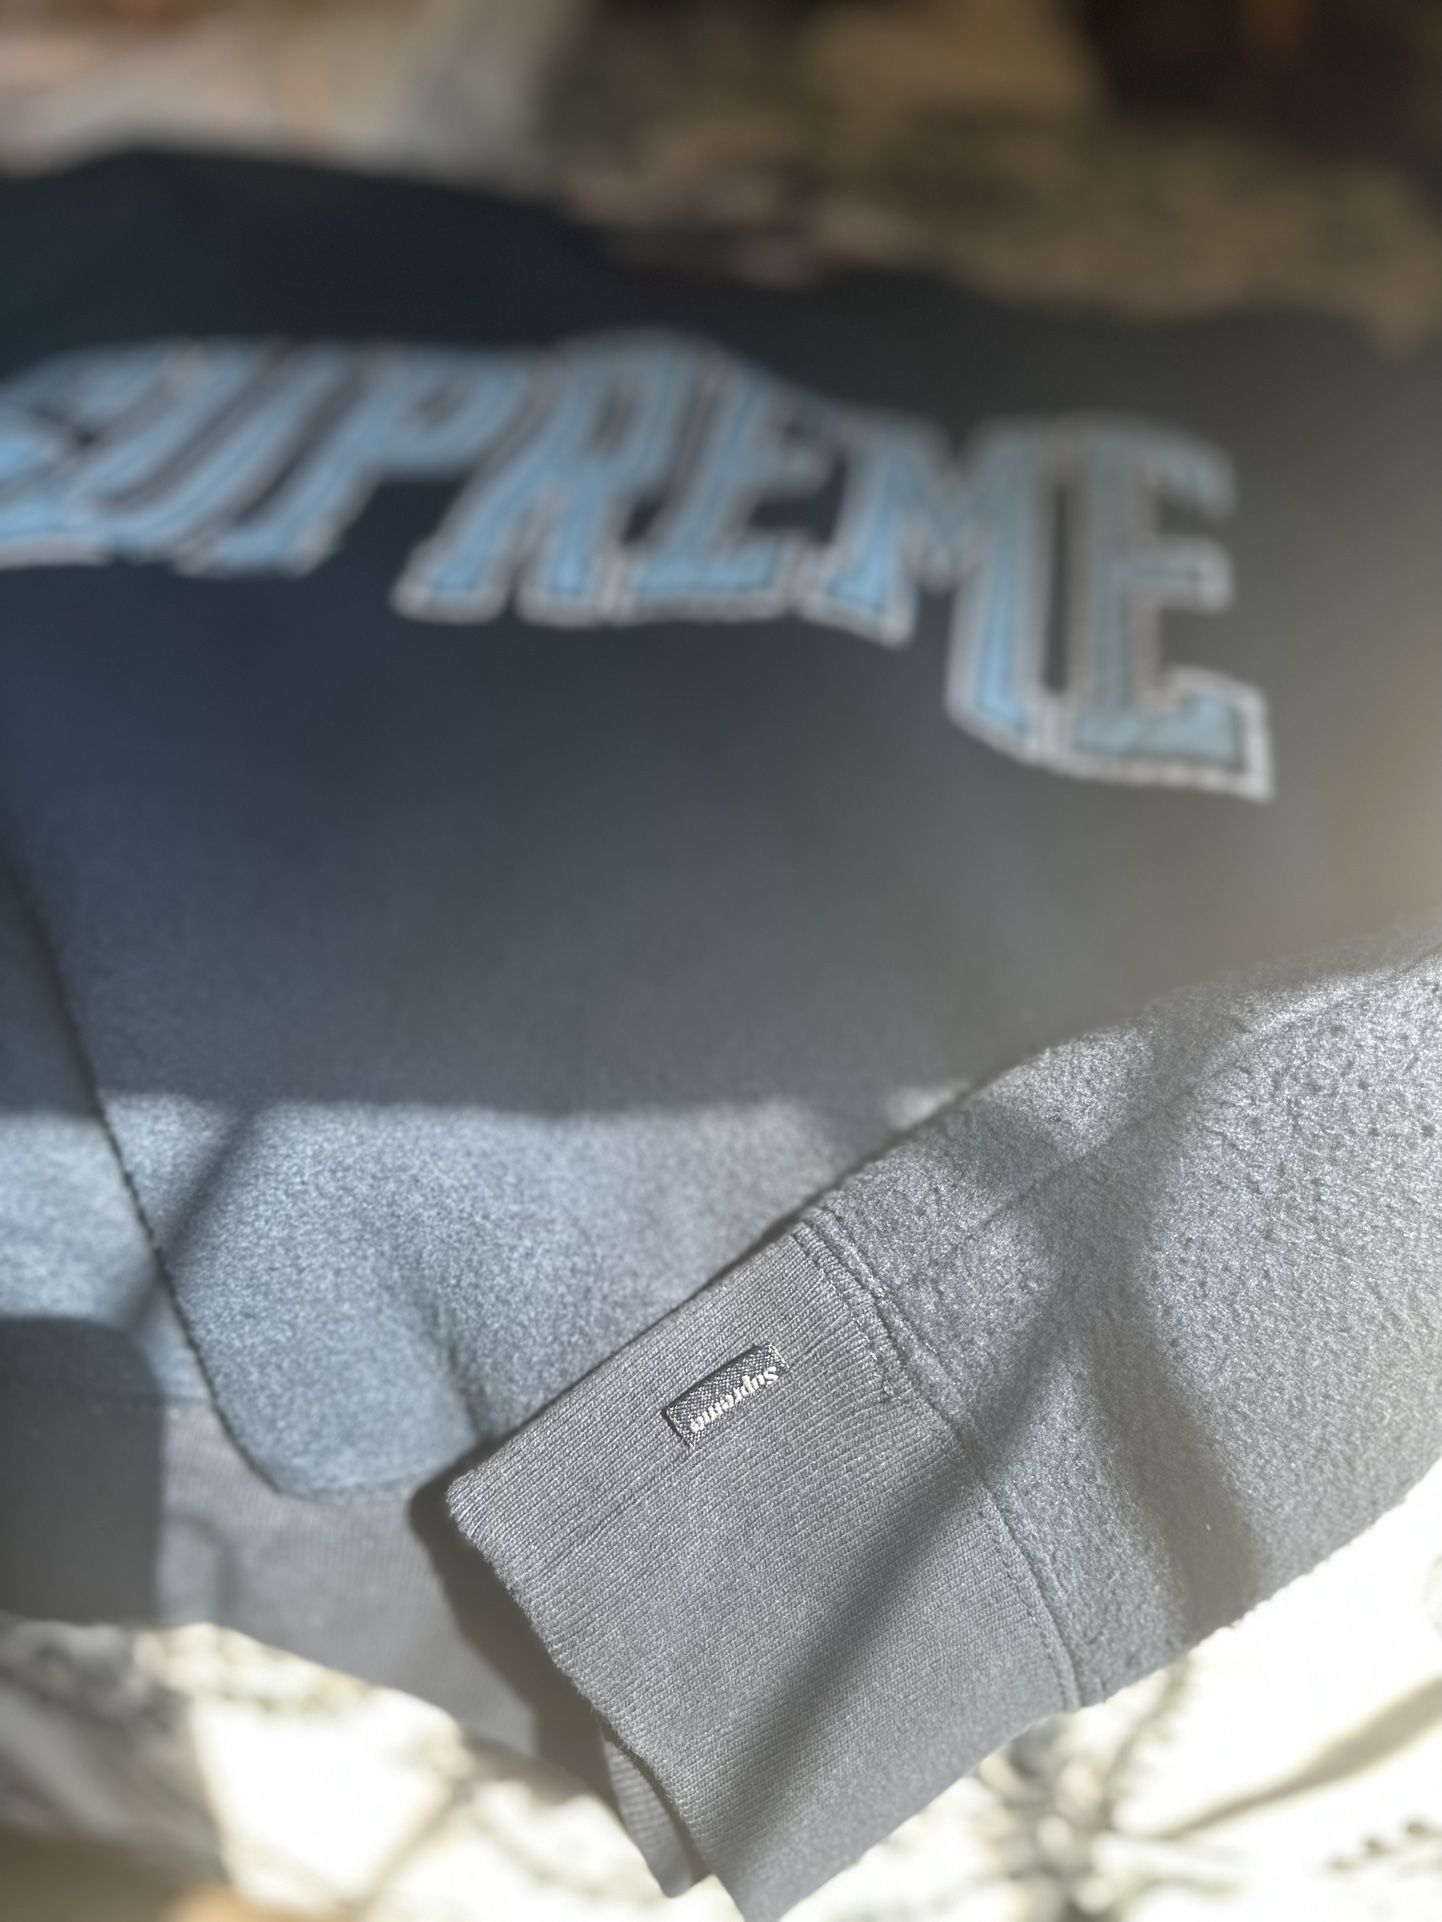 New Supreme Inside Out Crewneck Small  Fall/Winter Drop for Sale in  Downey, CA   OfferUp